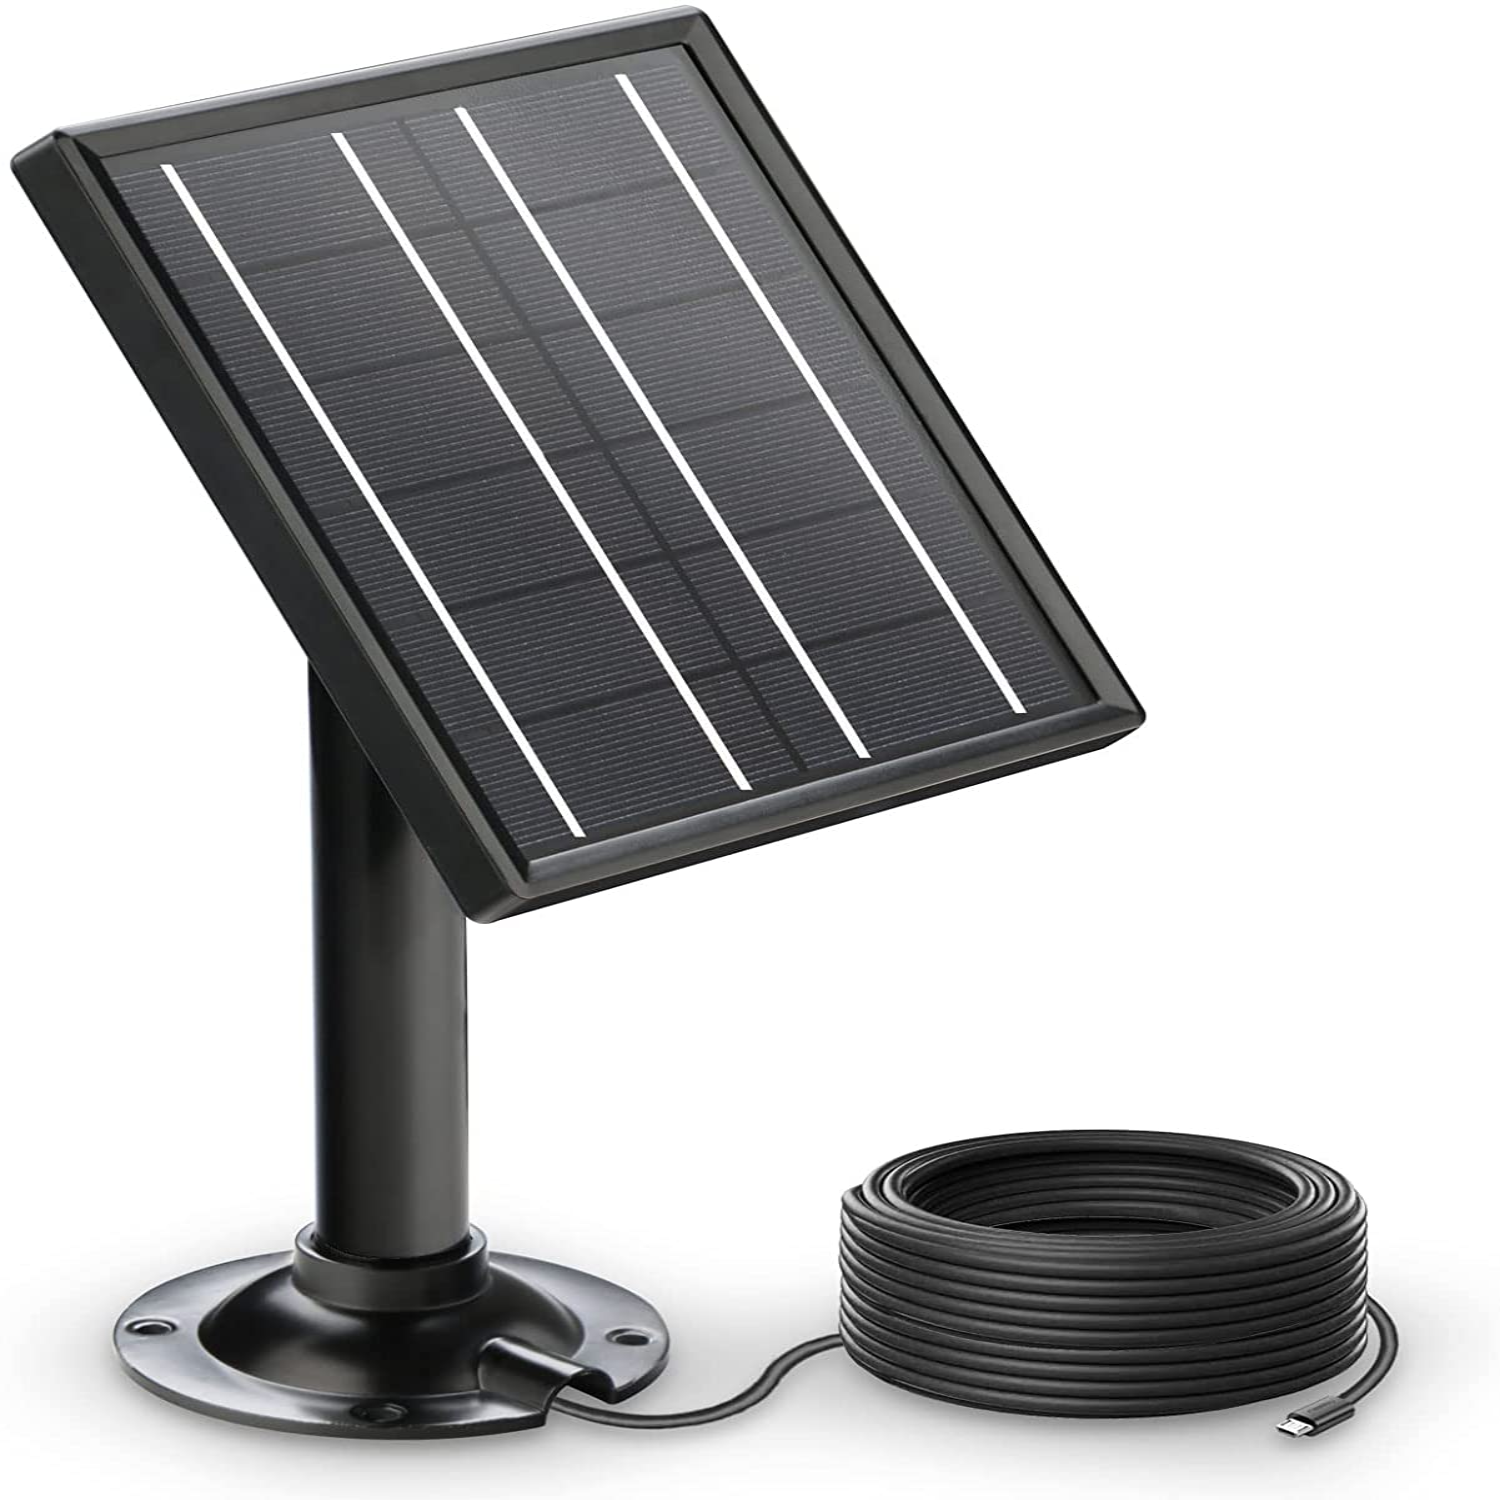 ALLPOWERS 5V 3.5W Solar Panel Kit for Outdoor Security Camera